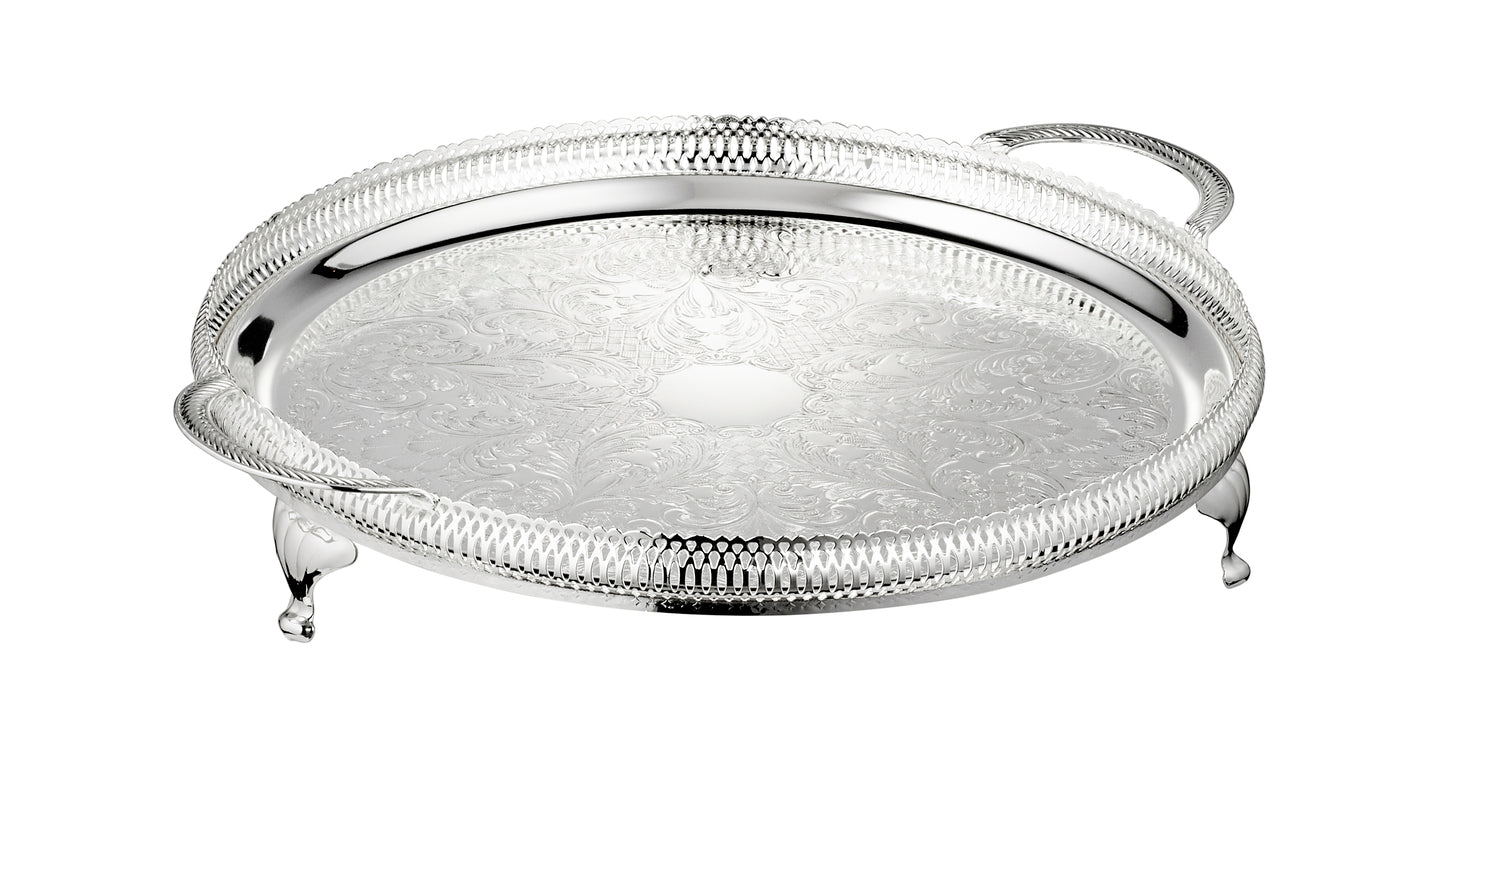 Queen Anne Round Tray with Handles and Legs -35 cm -Silver Plated